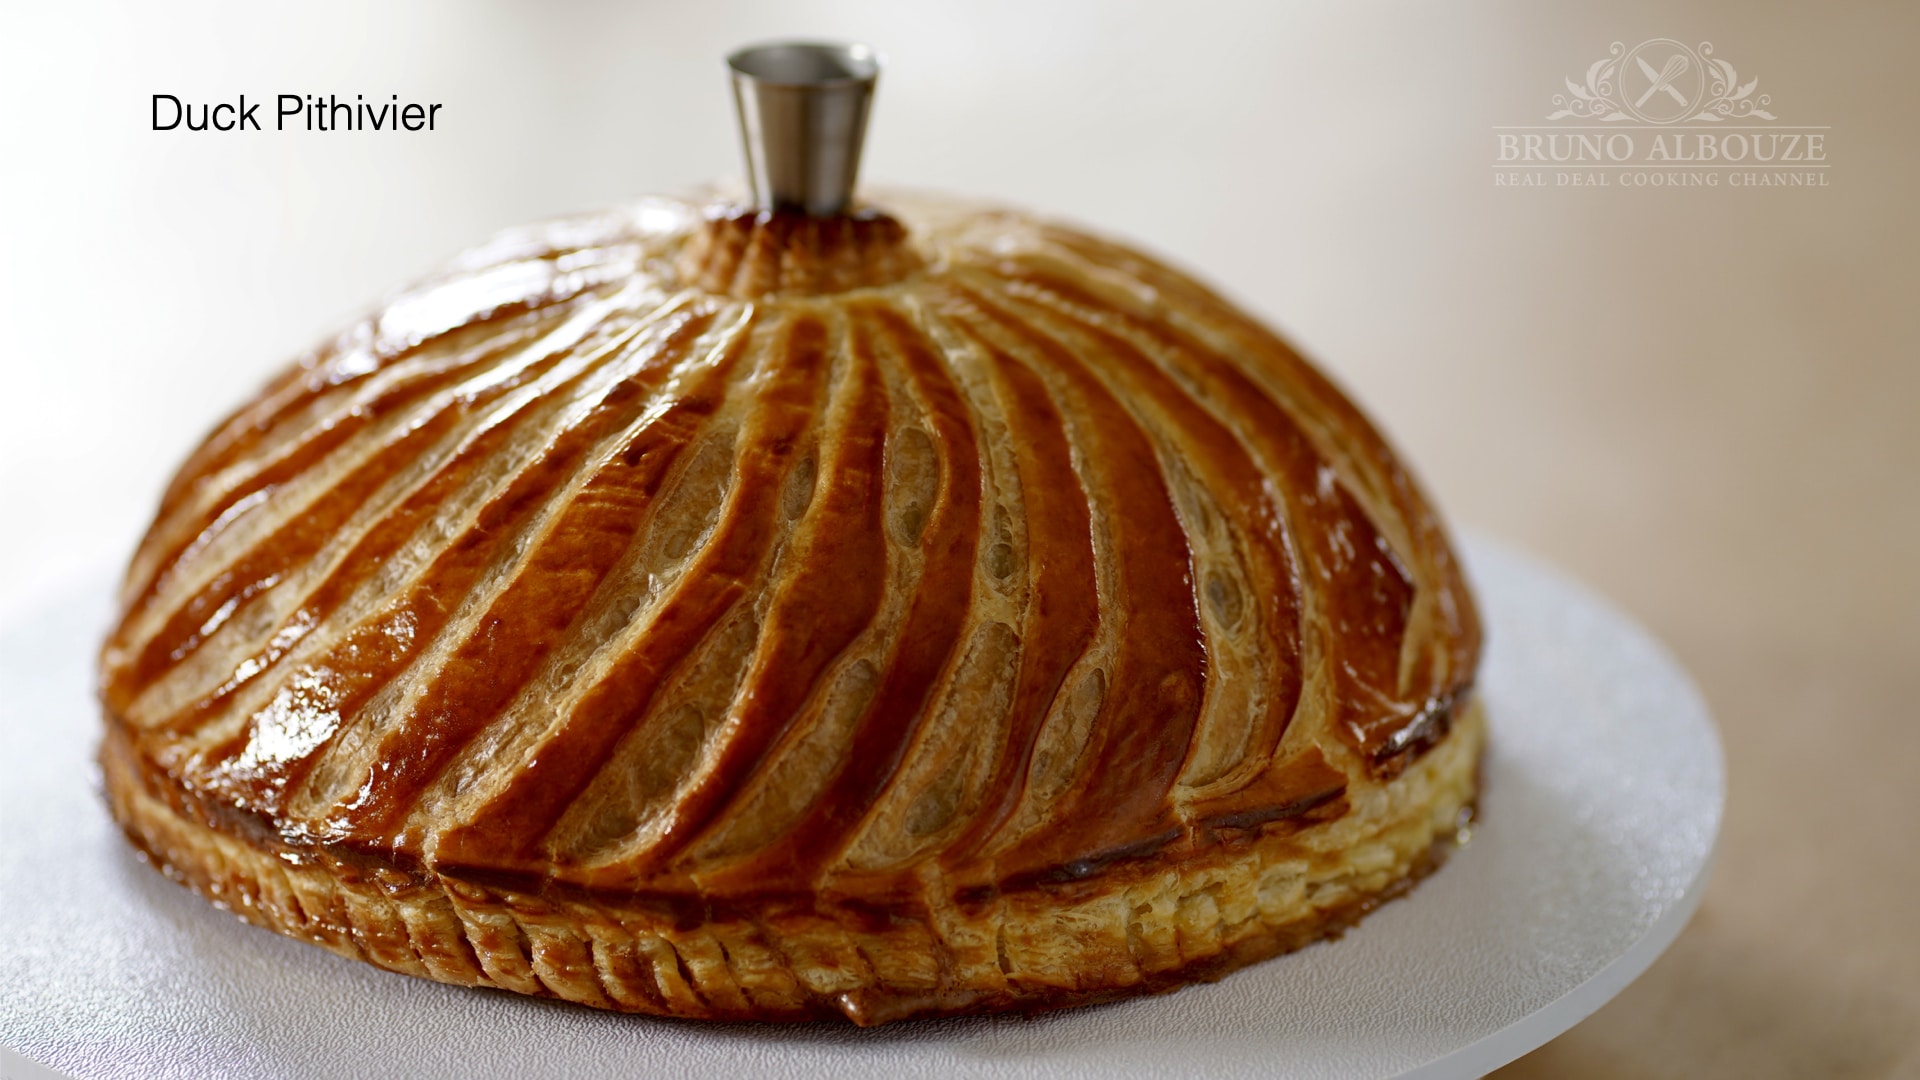 Classic Puff Pastry - Bruno Albouze - Master your cooking skills